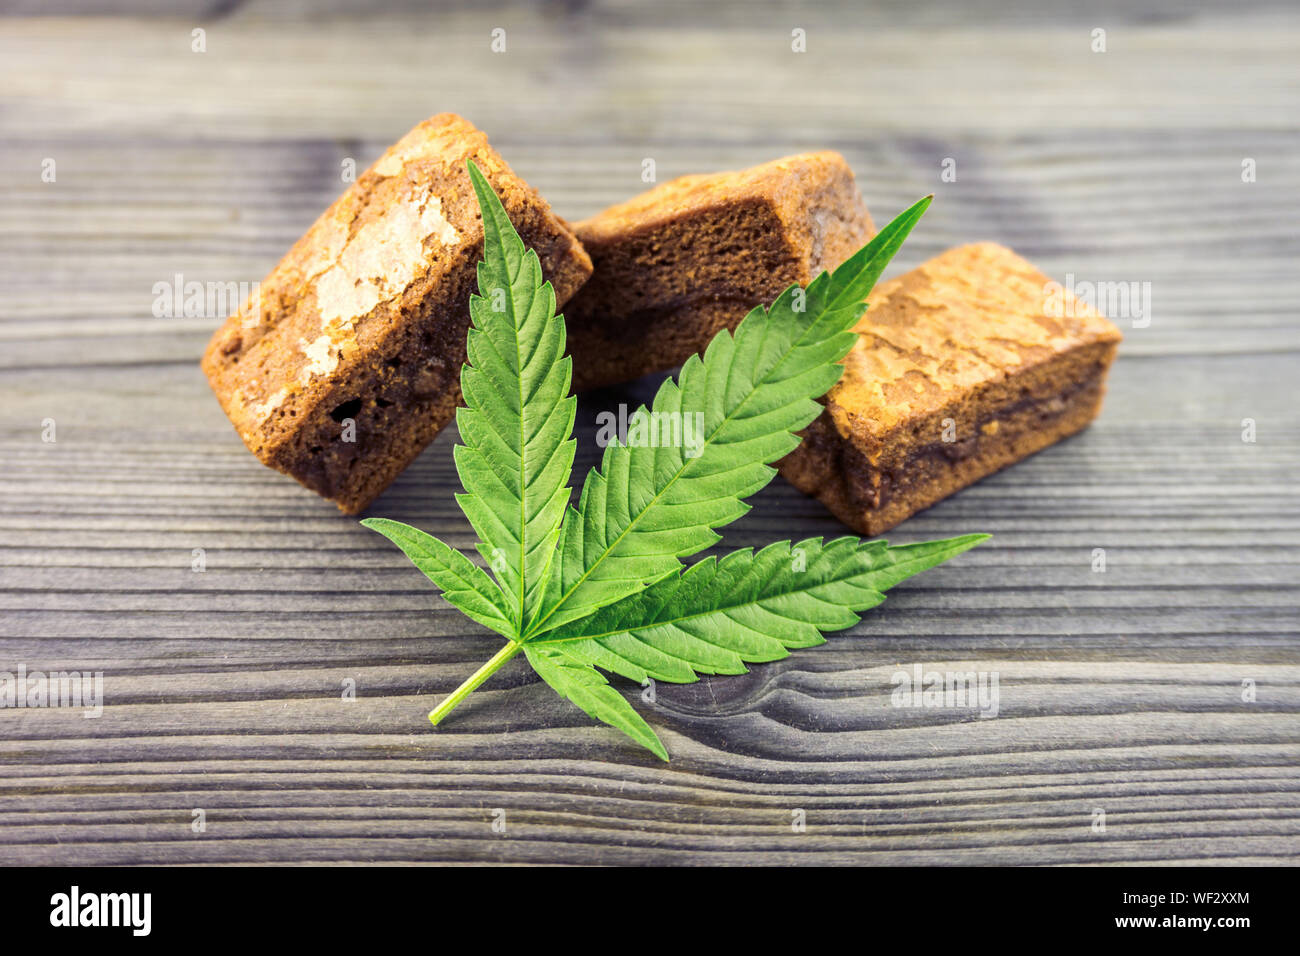 Cannabis Hash brownies with cannabis leaf on wooden table Stock Photo